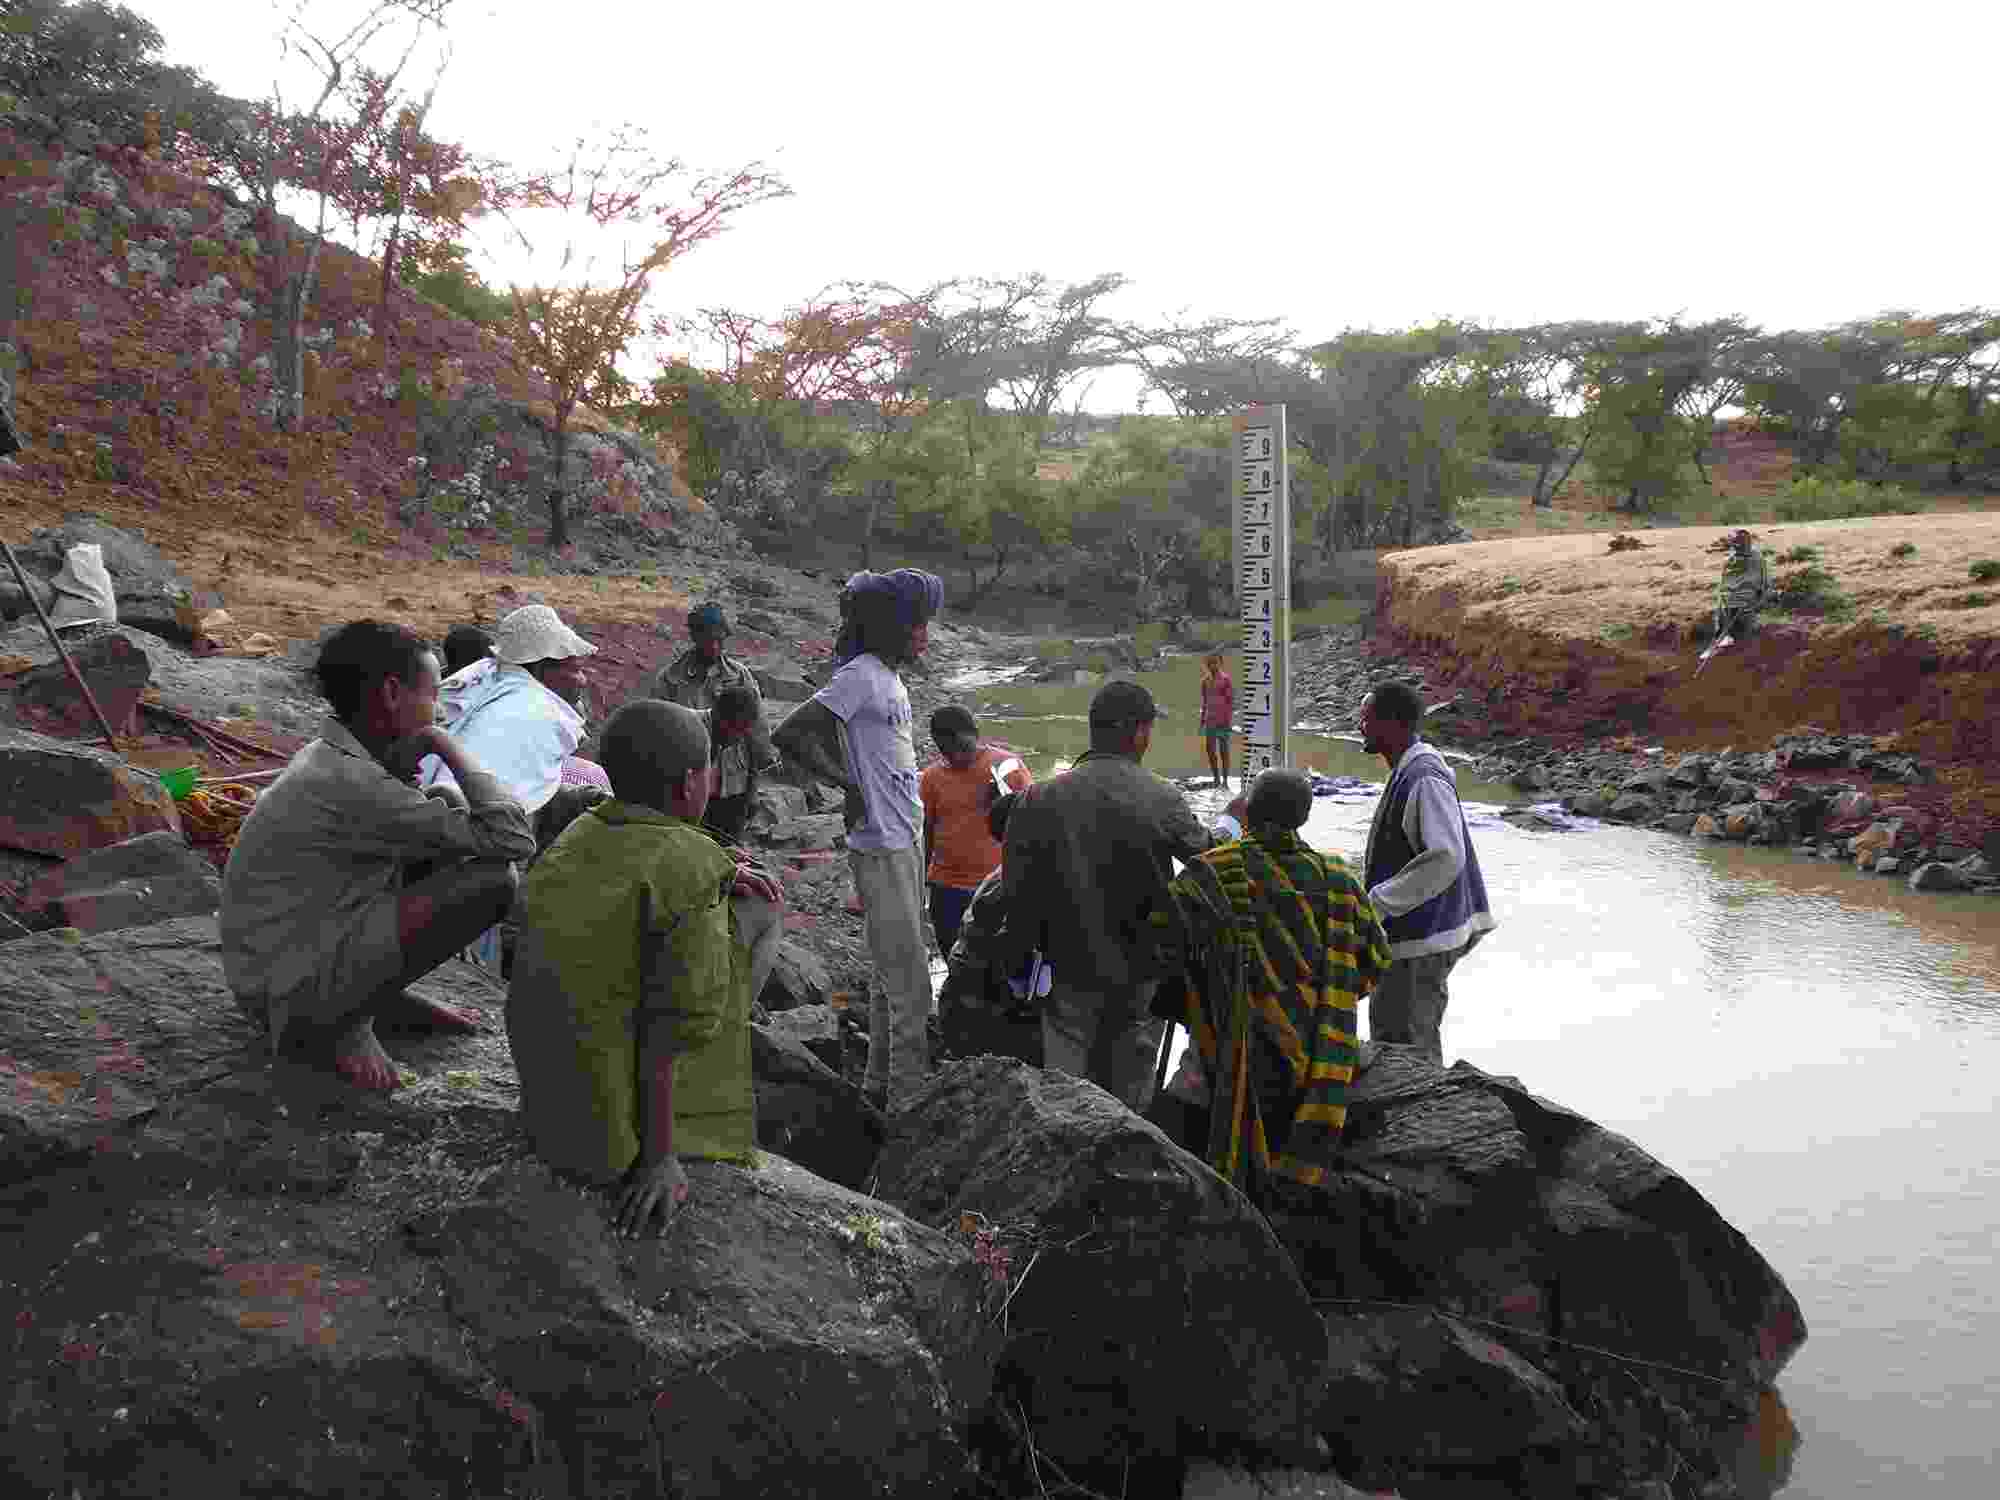 A group of people sit and stand on a rocky riverbank in front of a water depth measurement ruler, whilst listening to a Hub colleage. Trees, shrubbery, and rocks line the riverbanks as it winds away.